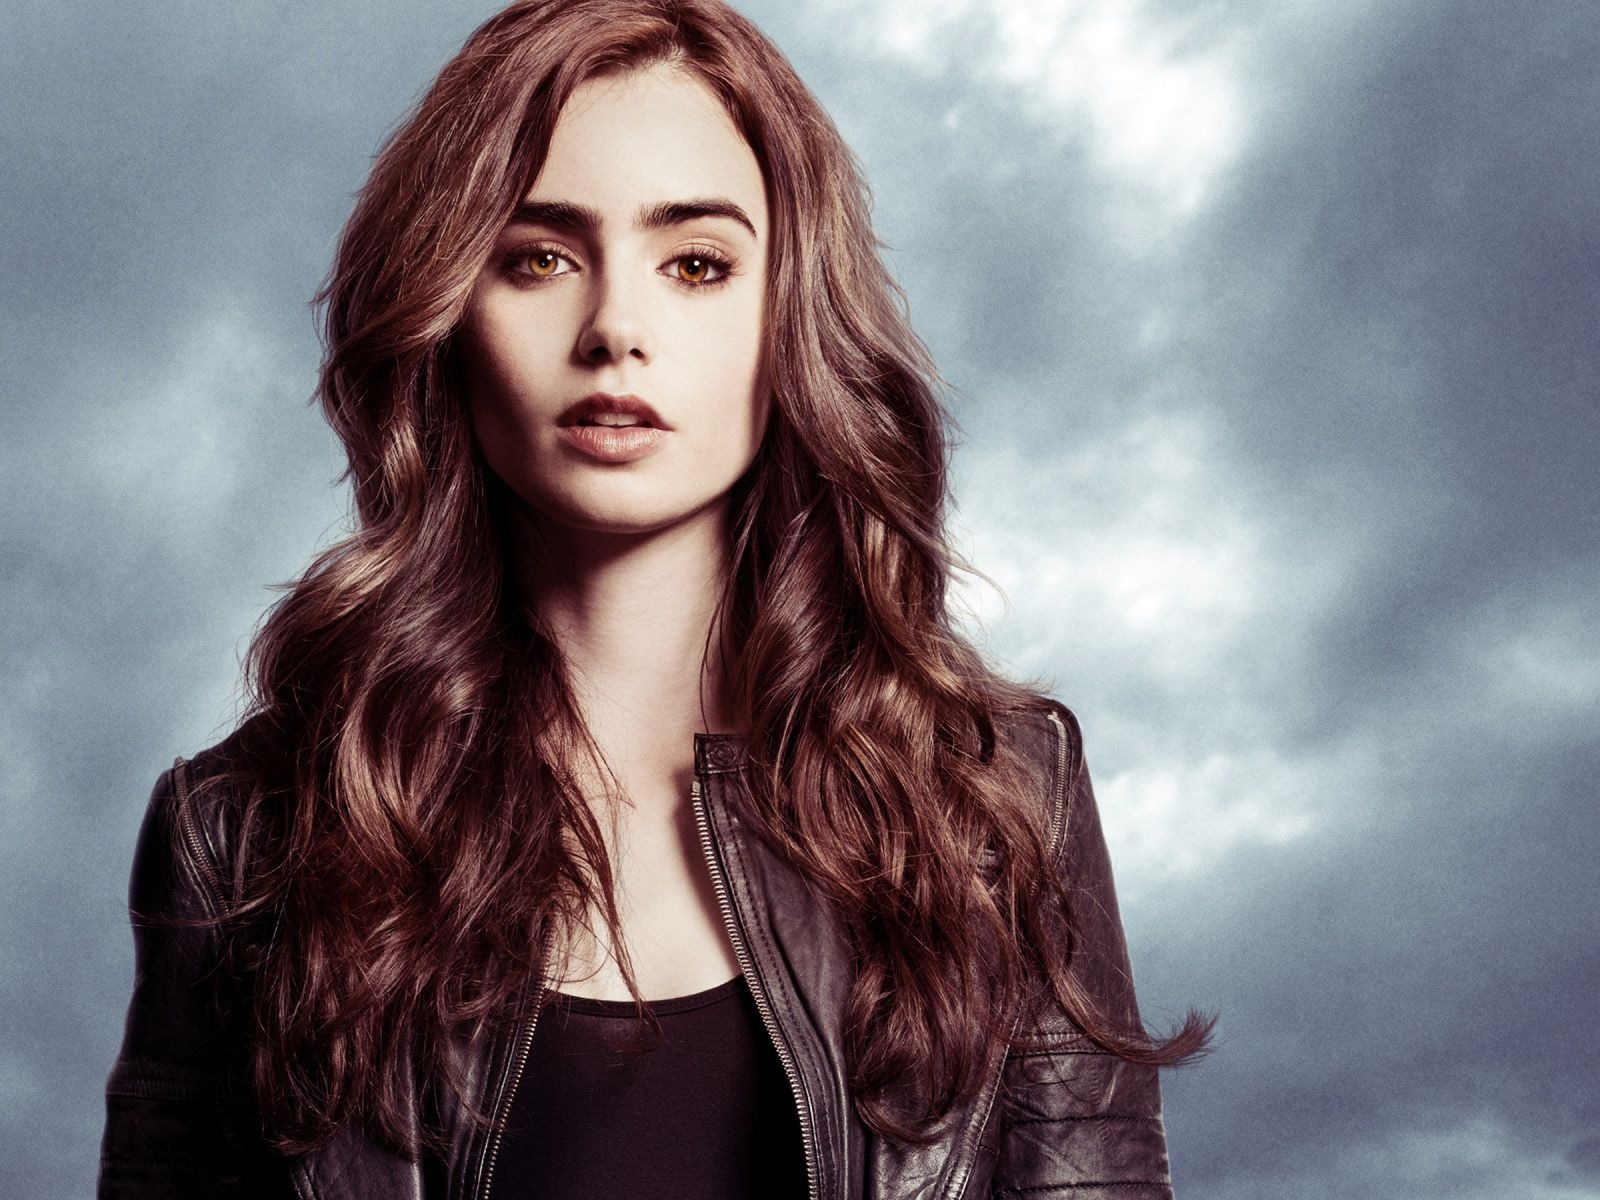 Lily Collins beautiful wallpapers #18 - 1600x1200